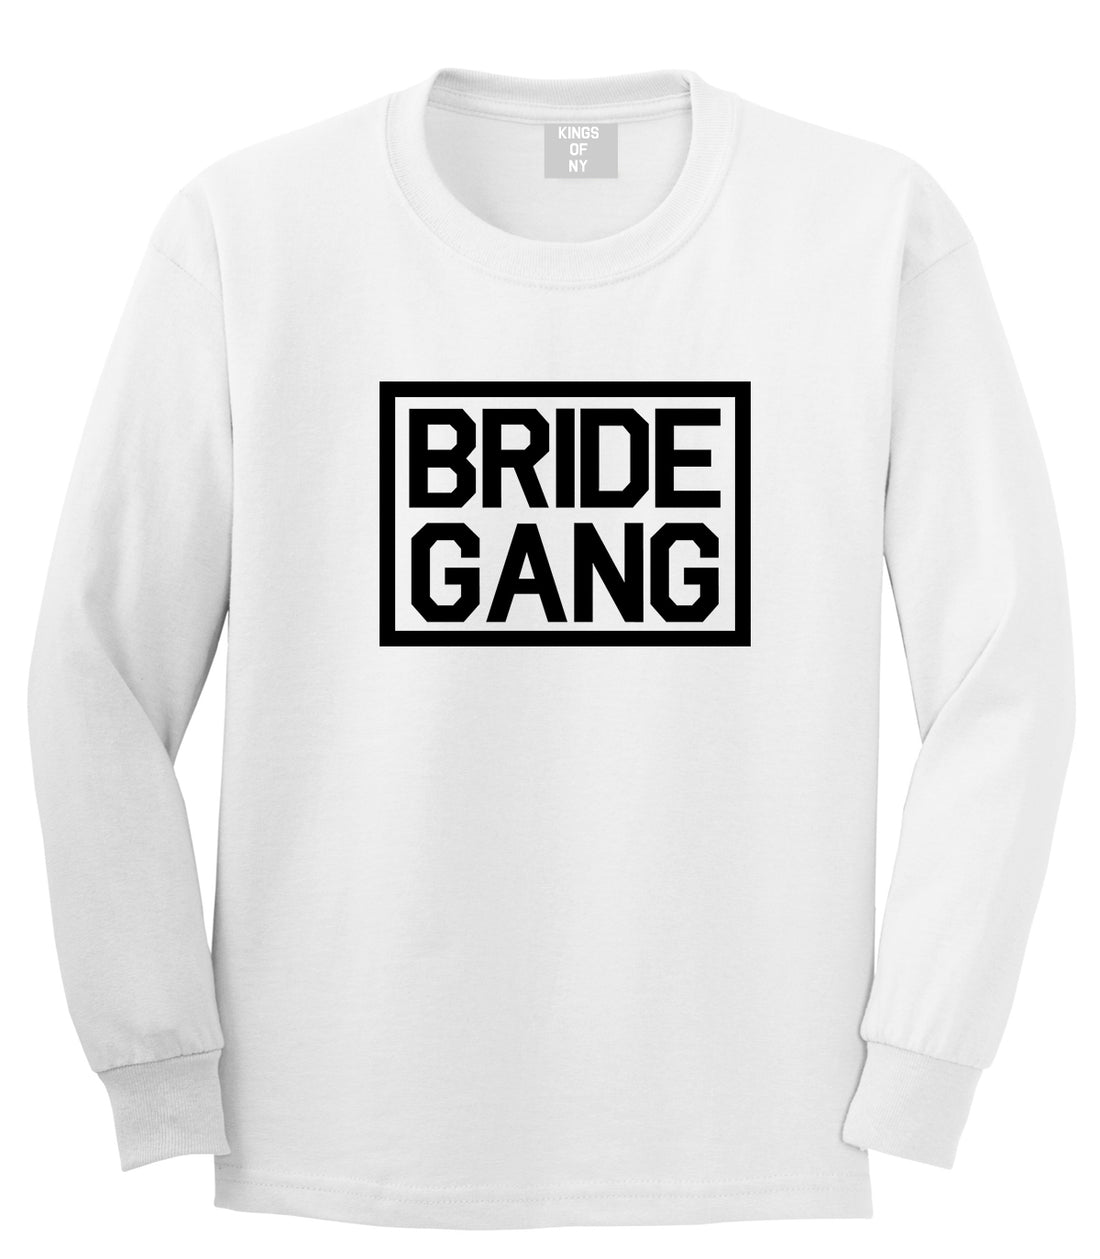 Bride Gang Bachlorette Party White Long Sleeve T-Shirt by Kings Of NY